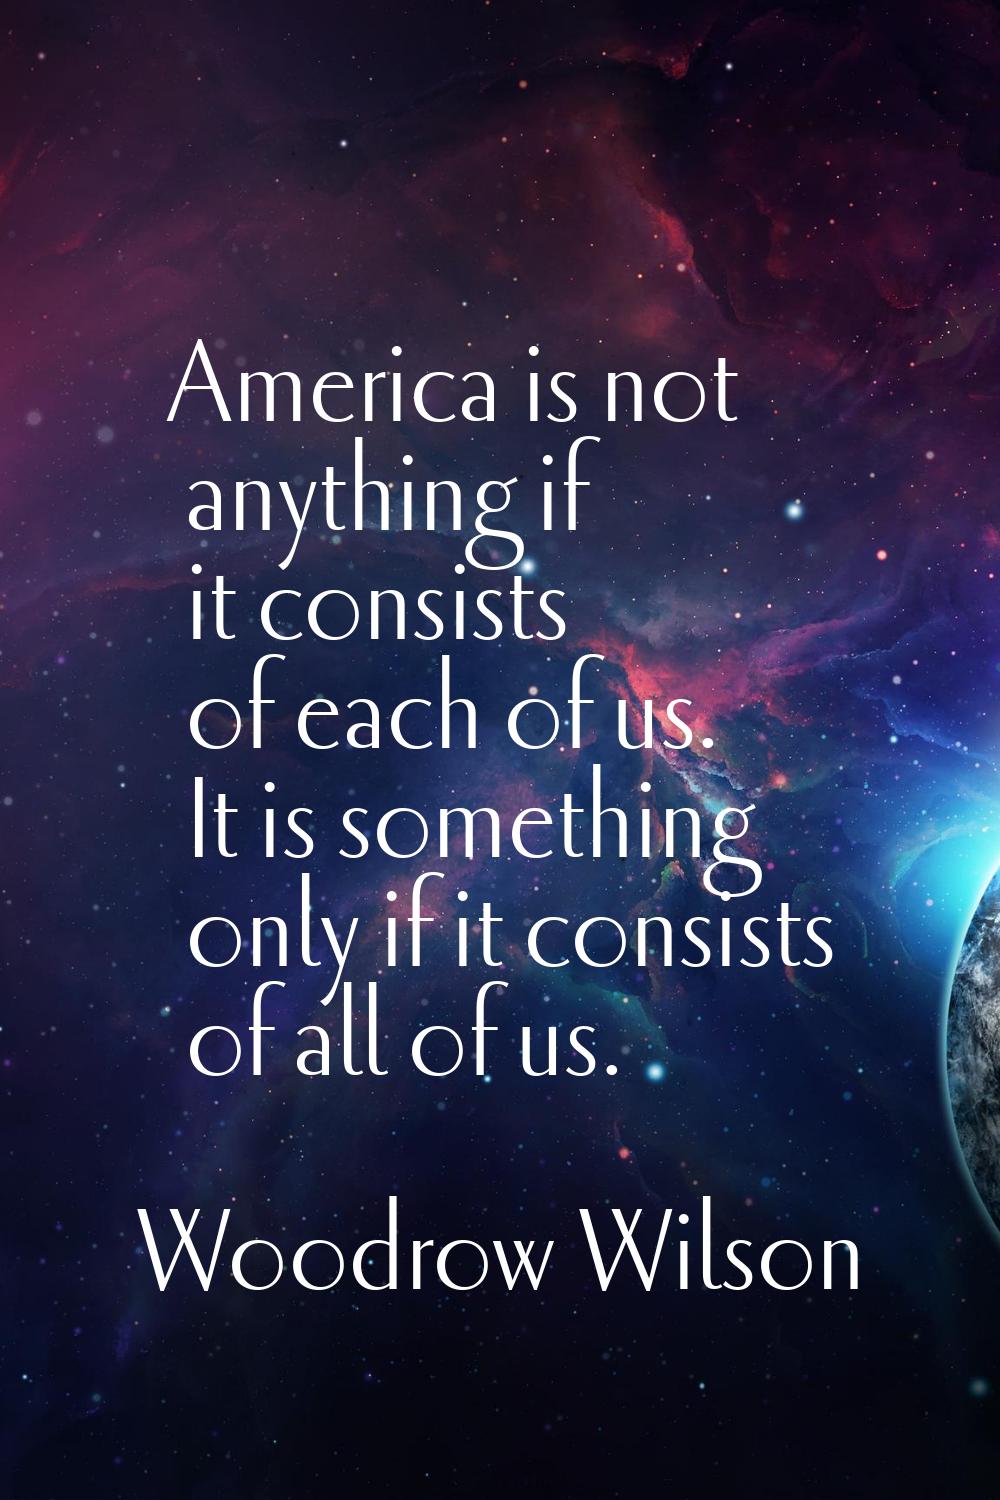 America is not anything if it consists of each of us. It is something only if it consists of all of